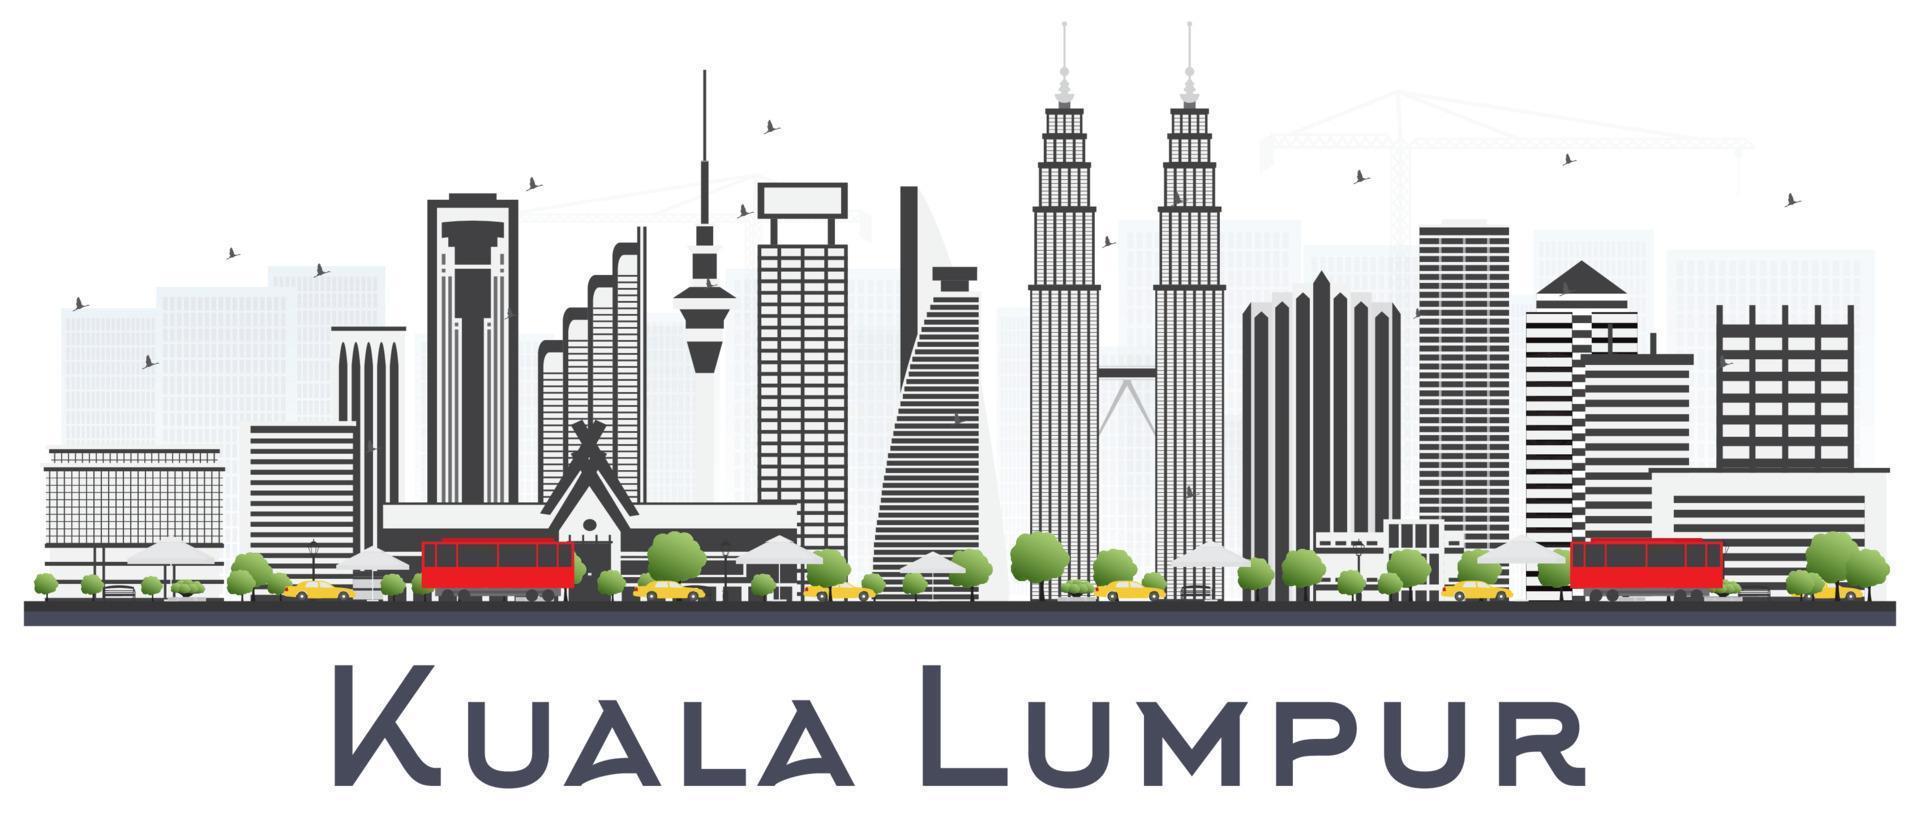 Kuala Lumpur Malaysia City Skyline with Gray Buildings Isolated on White Background. vector